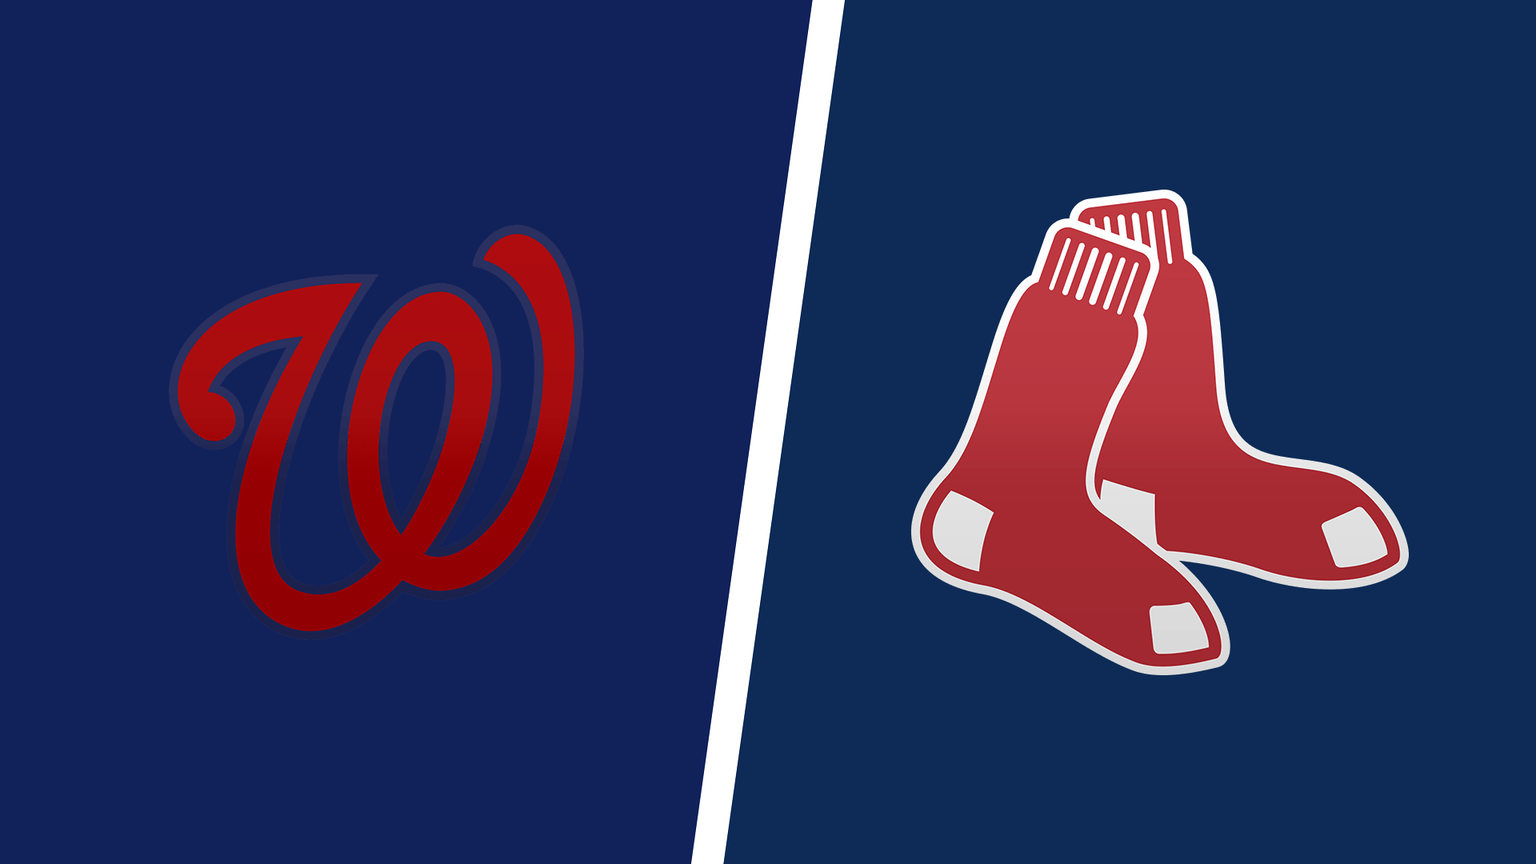 How to Watch Boston Red Sox vs. Washington Nationals Live Online